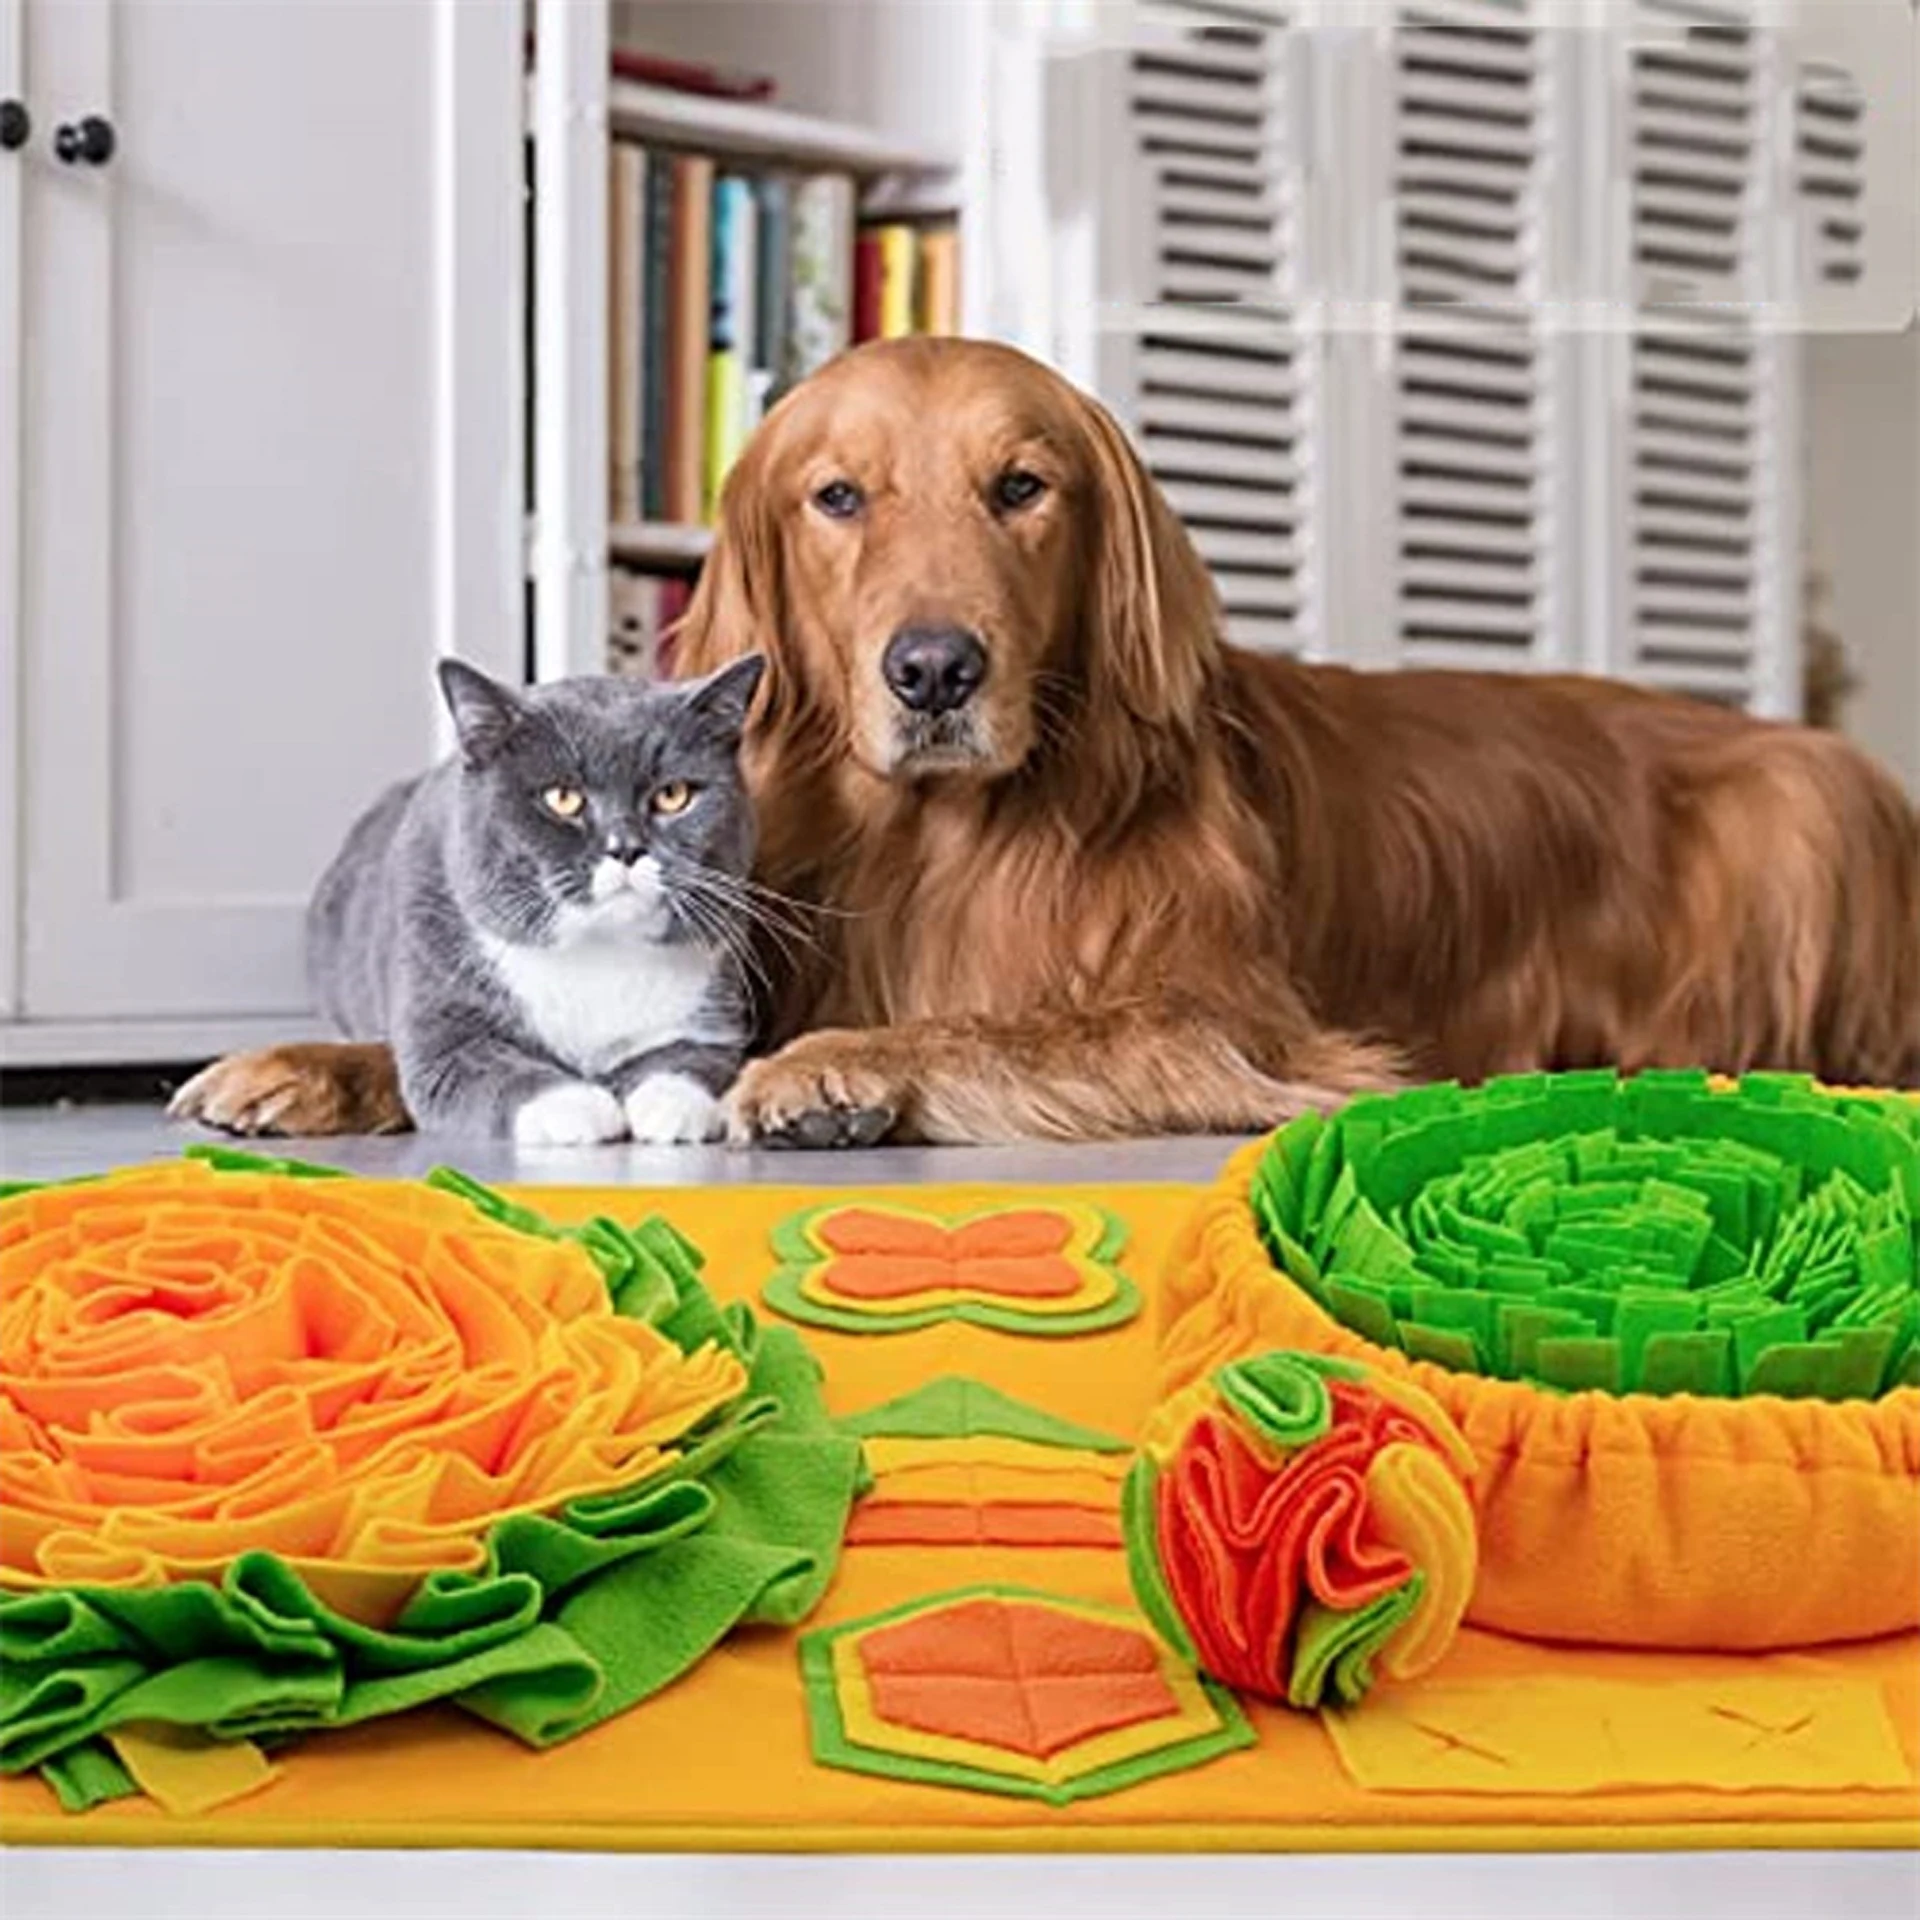 https://ae01.alicdn.com/kf/S6899cf169e324c83894ceba9490b6f8aF/Snuffle-Mat-for-Large-Dogs-Puzzle-Toy-Resizable-Slow-Feeding-Mat-Portable-Pet-Training-Mat-for.jpg